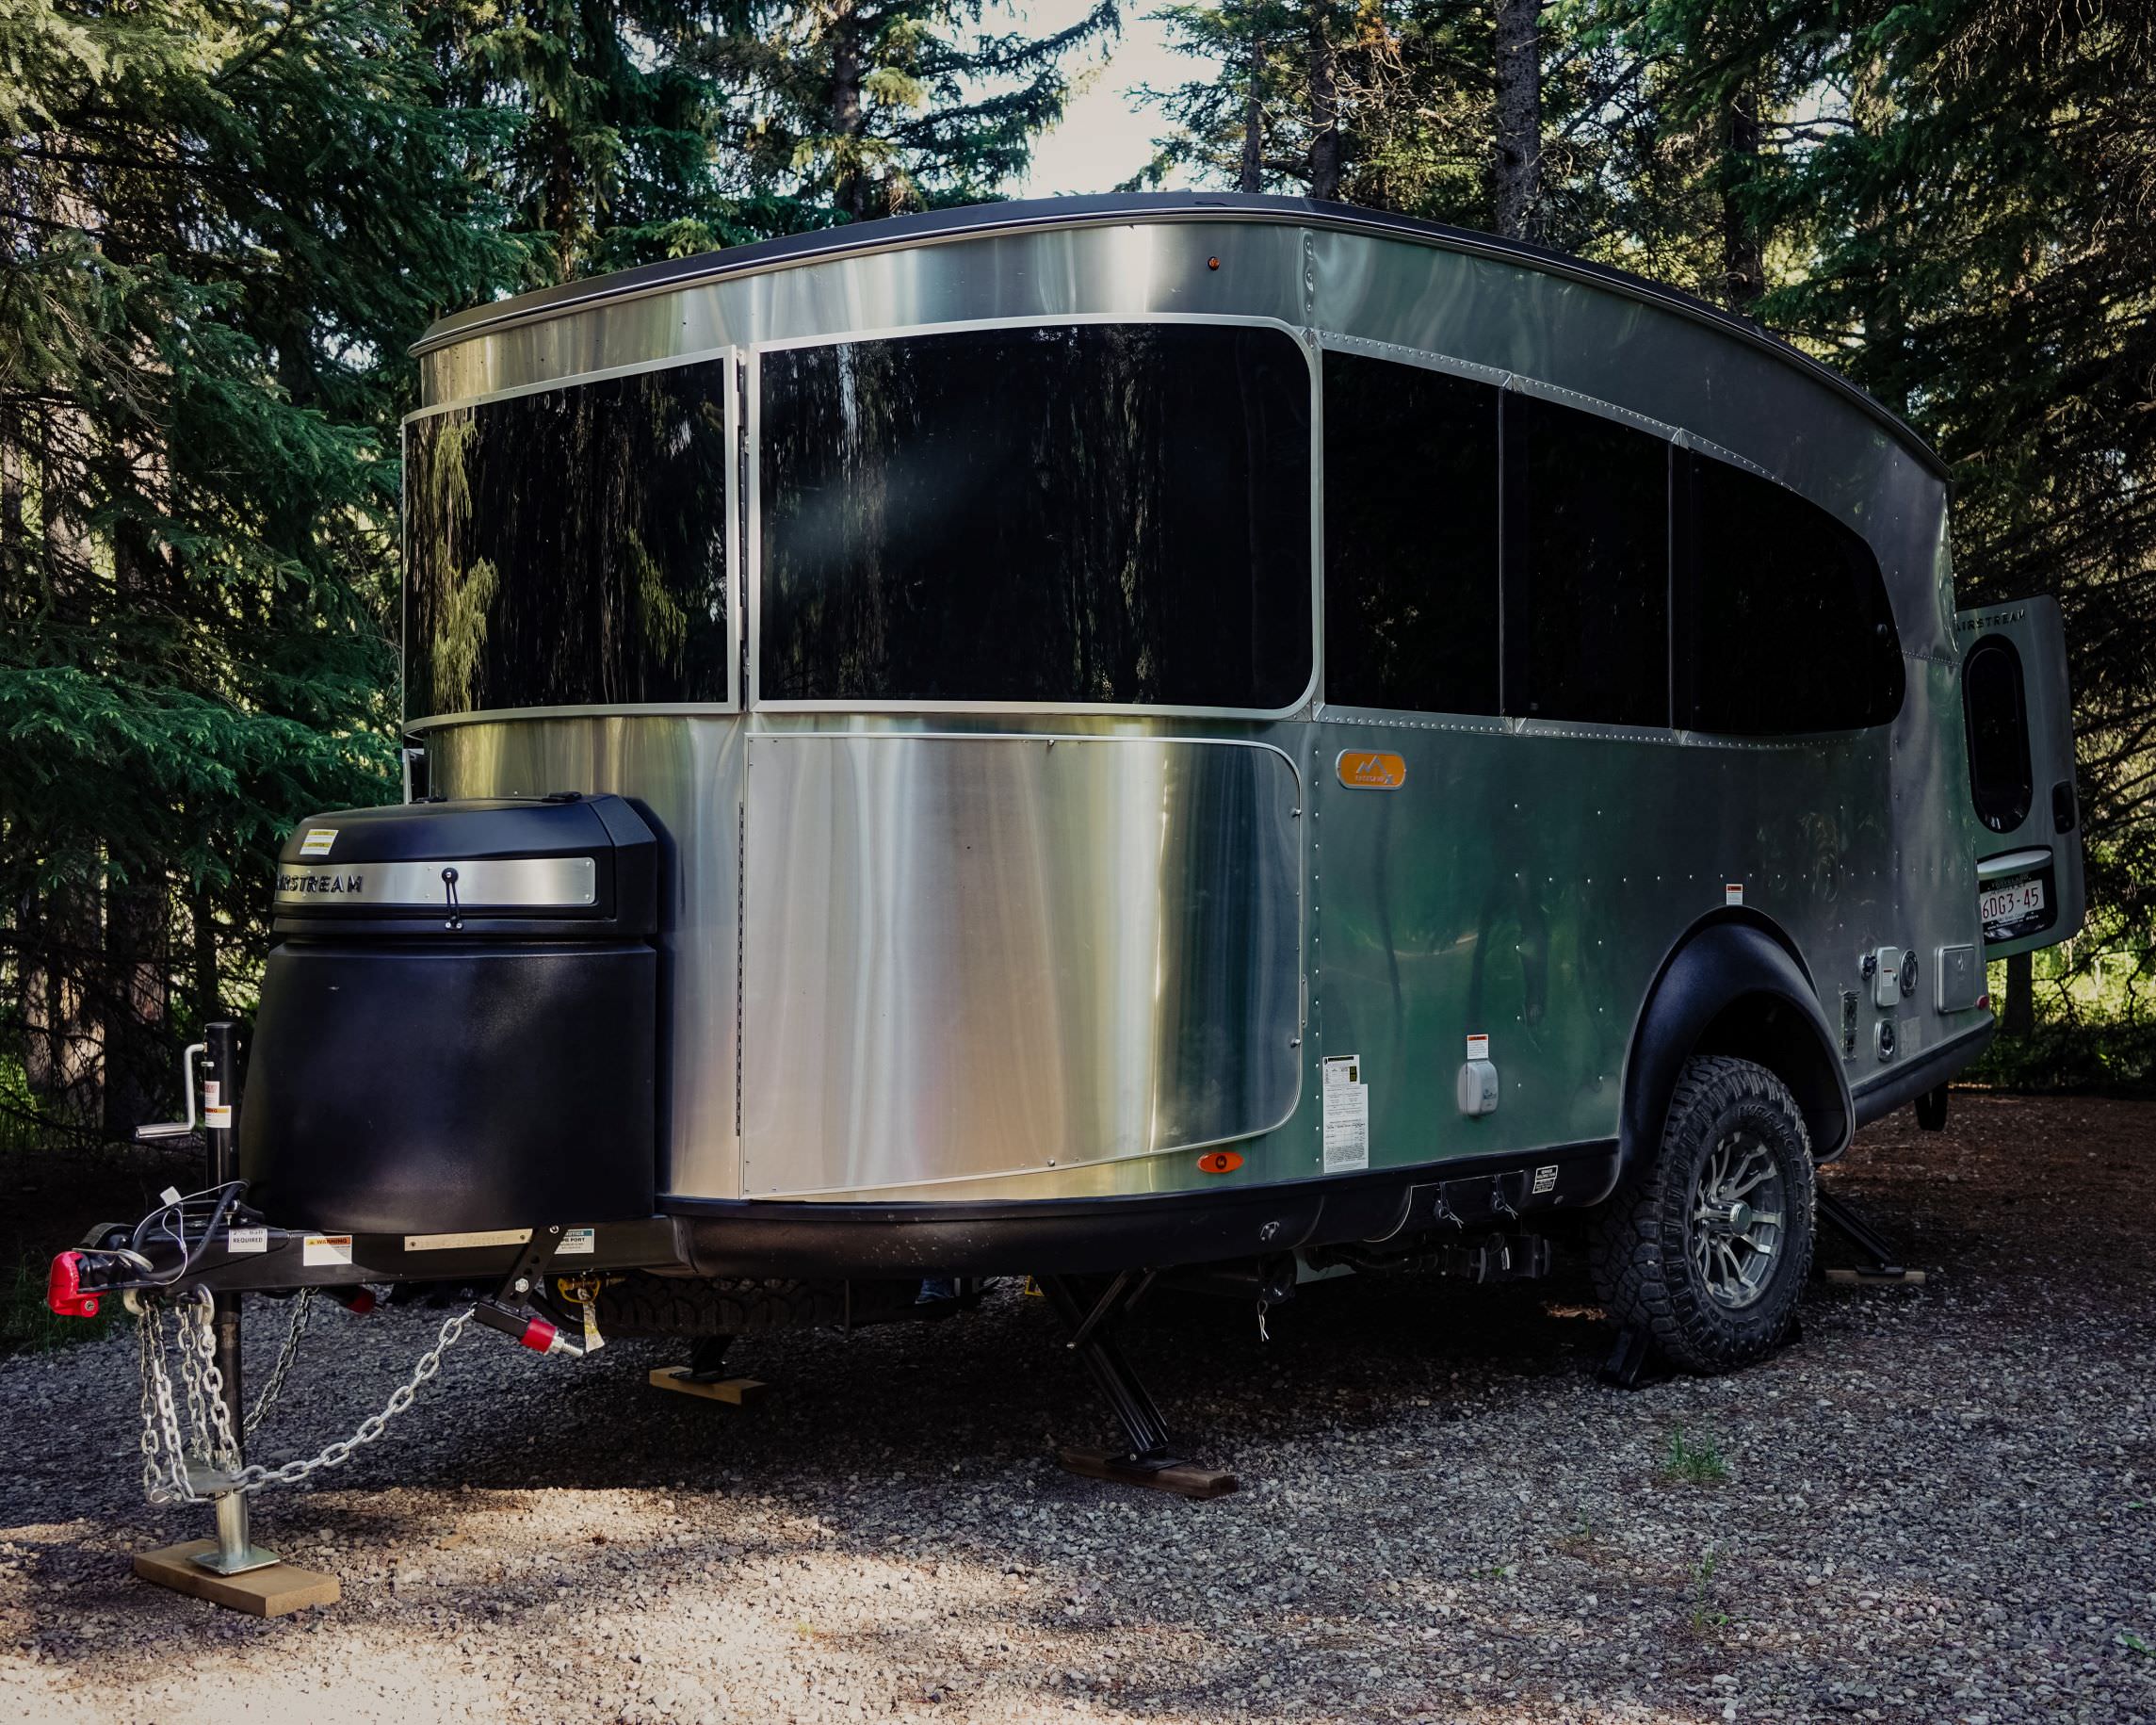 Airstream Basecamp 20X at the campsite